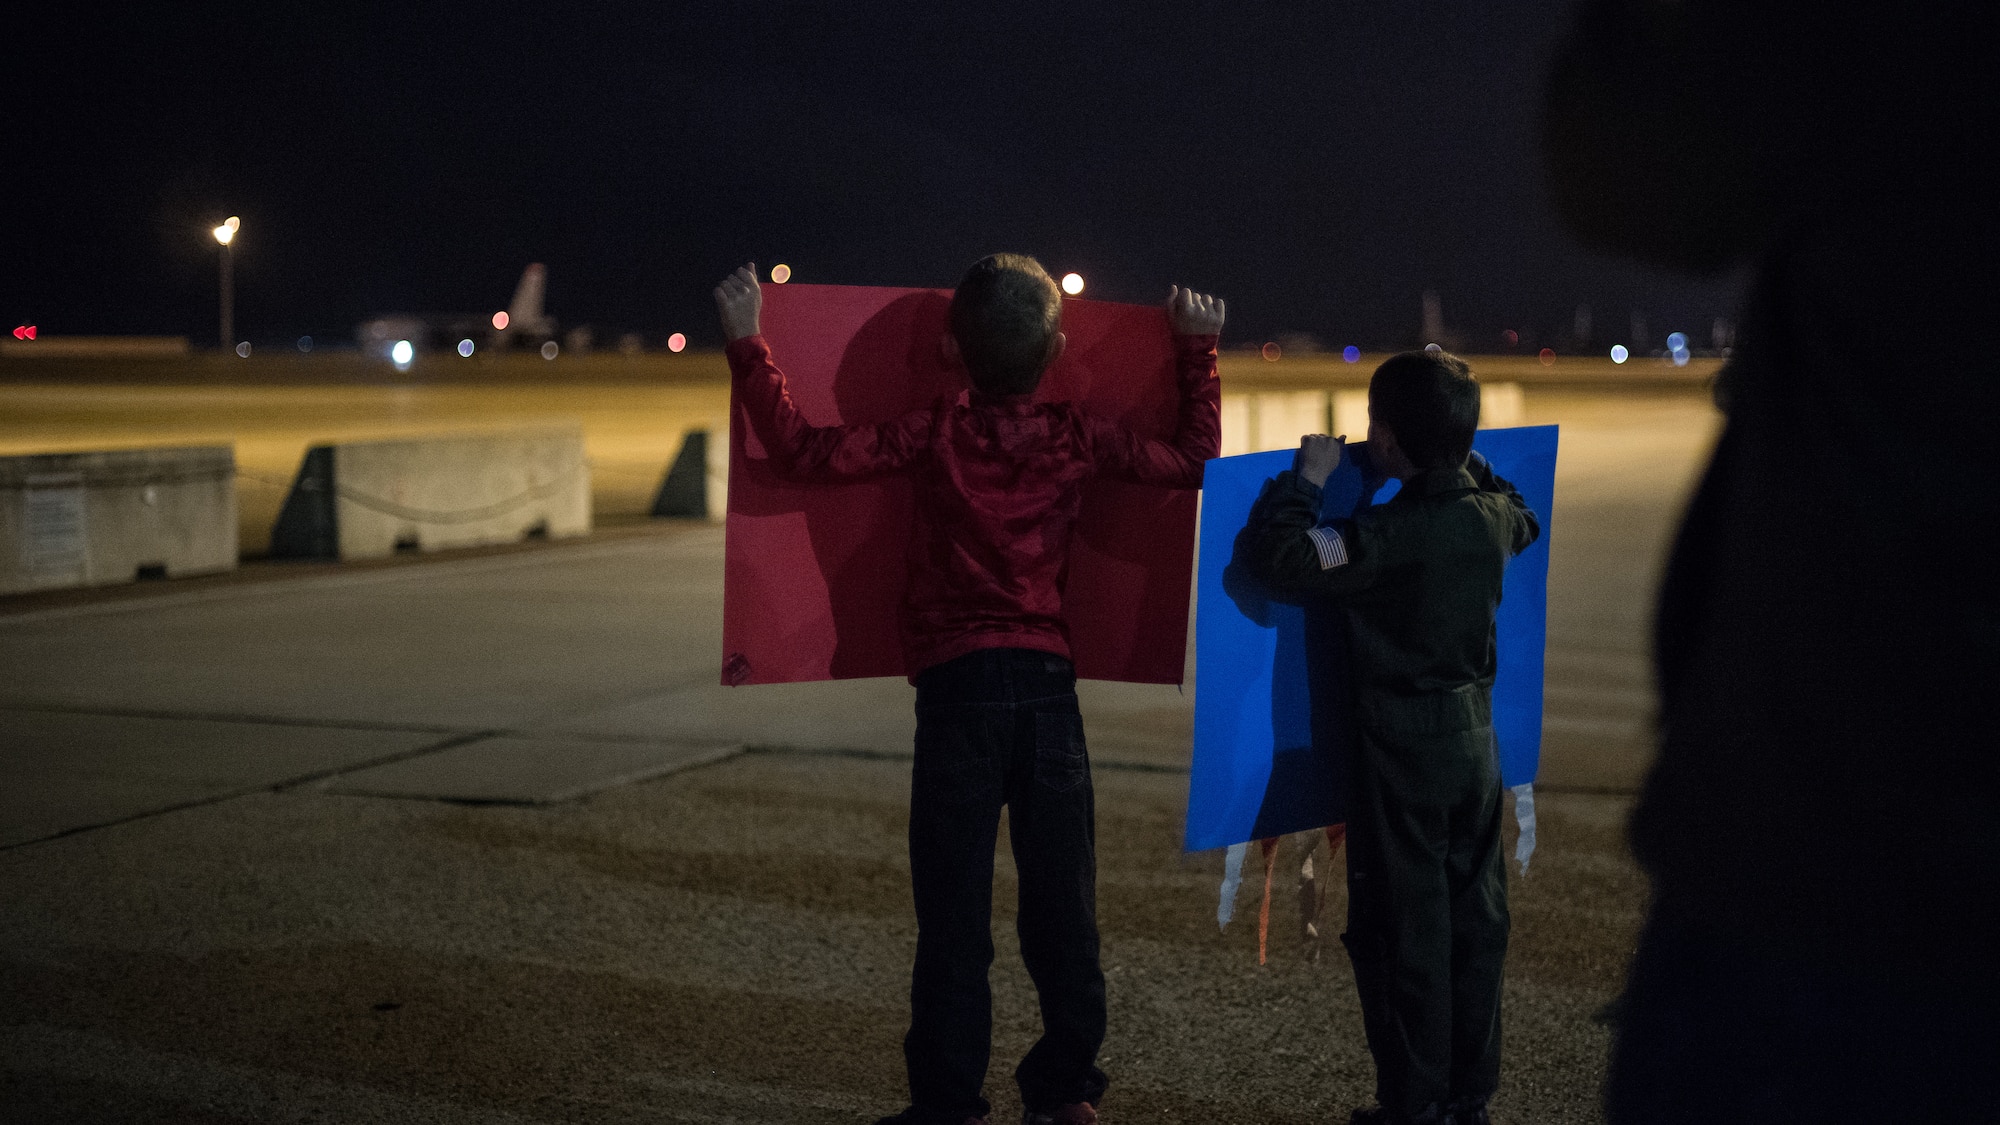 Two boys raise posters for their father returning from a deployment at Barksdale Air Force Base, La., Jan. 16, 2019. Their father is part of the 96th Bomb Squadron that deployed to Andersen Air Force Base, Guam. (U.S. Air Force photo by Airman 1st Class Lillian Miller)